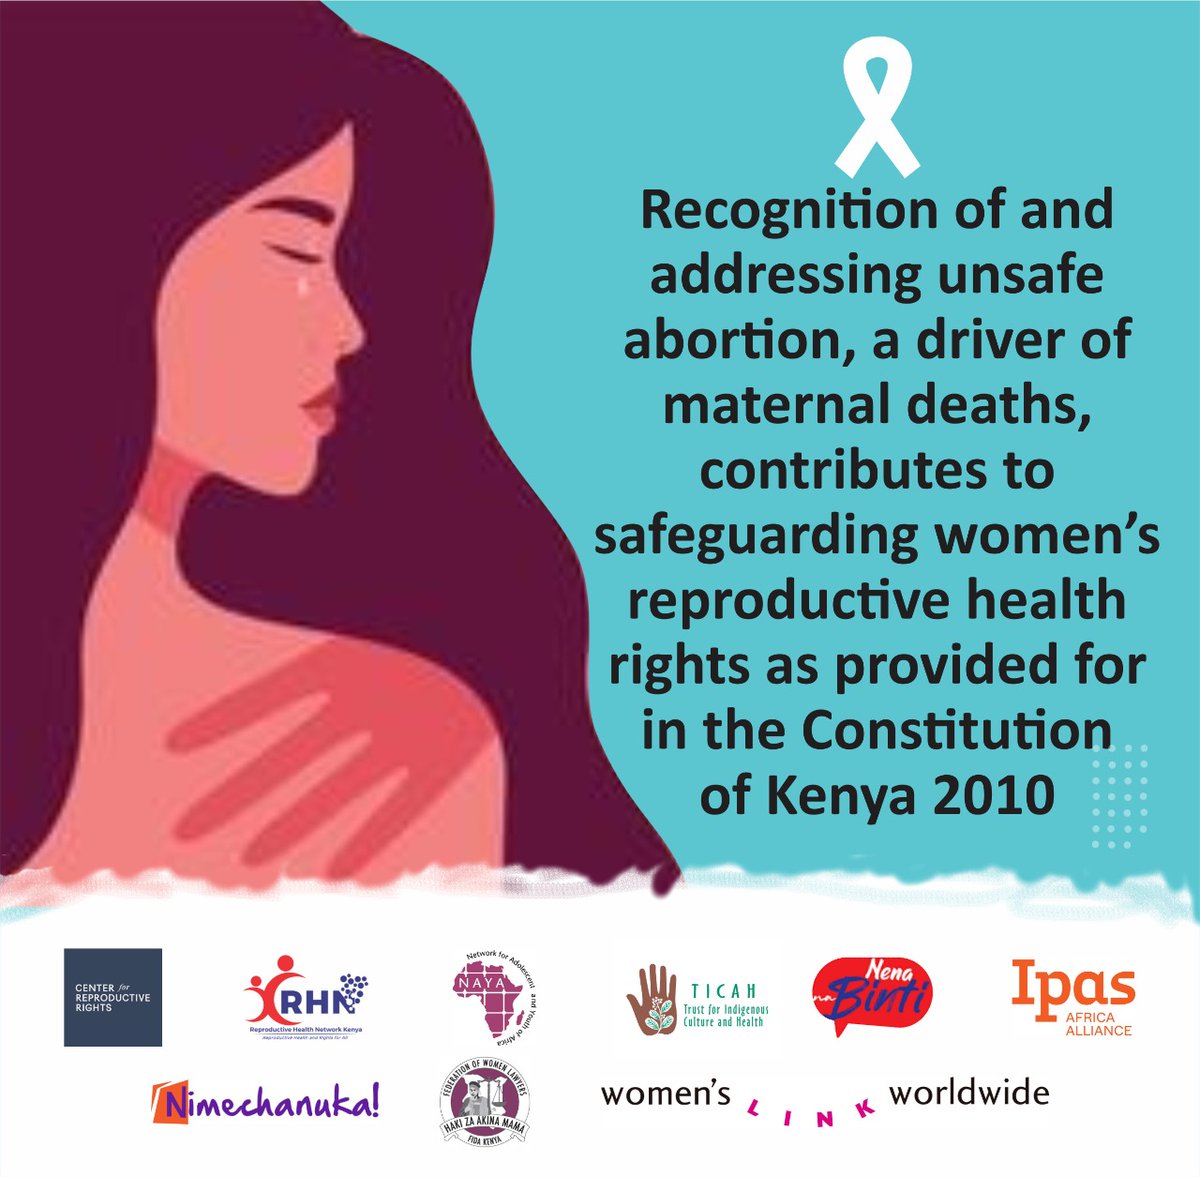 Recognising and addressing unsafe abortion contributes to safeguarding women’s rights, including their reproductive health rights, as provided for in the Constitution of #Kenya 2010 #DefendHerRightsKE